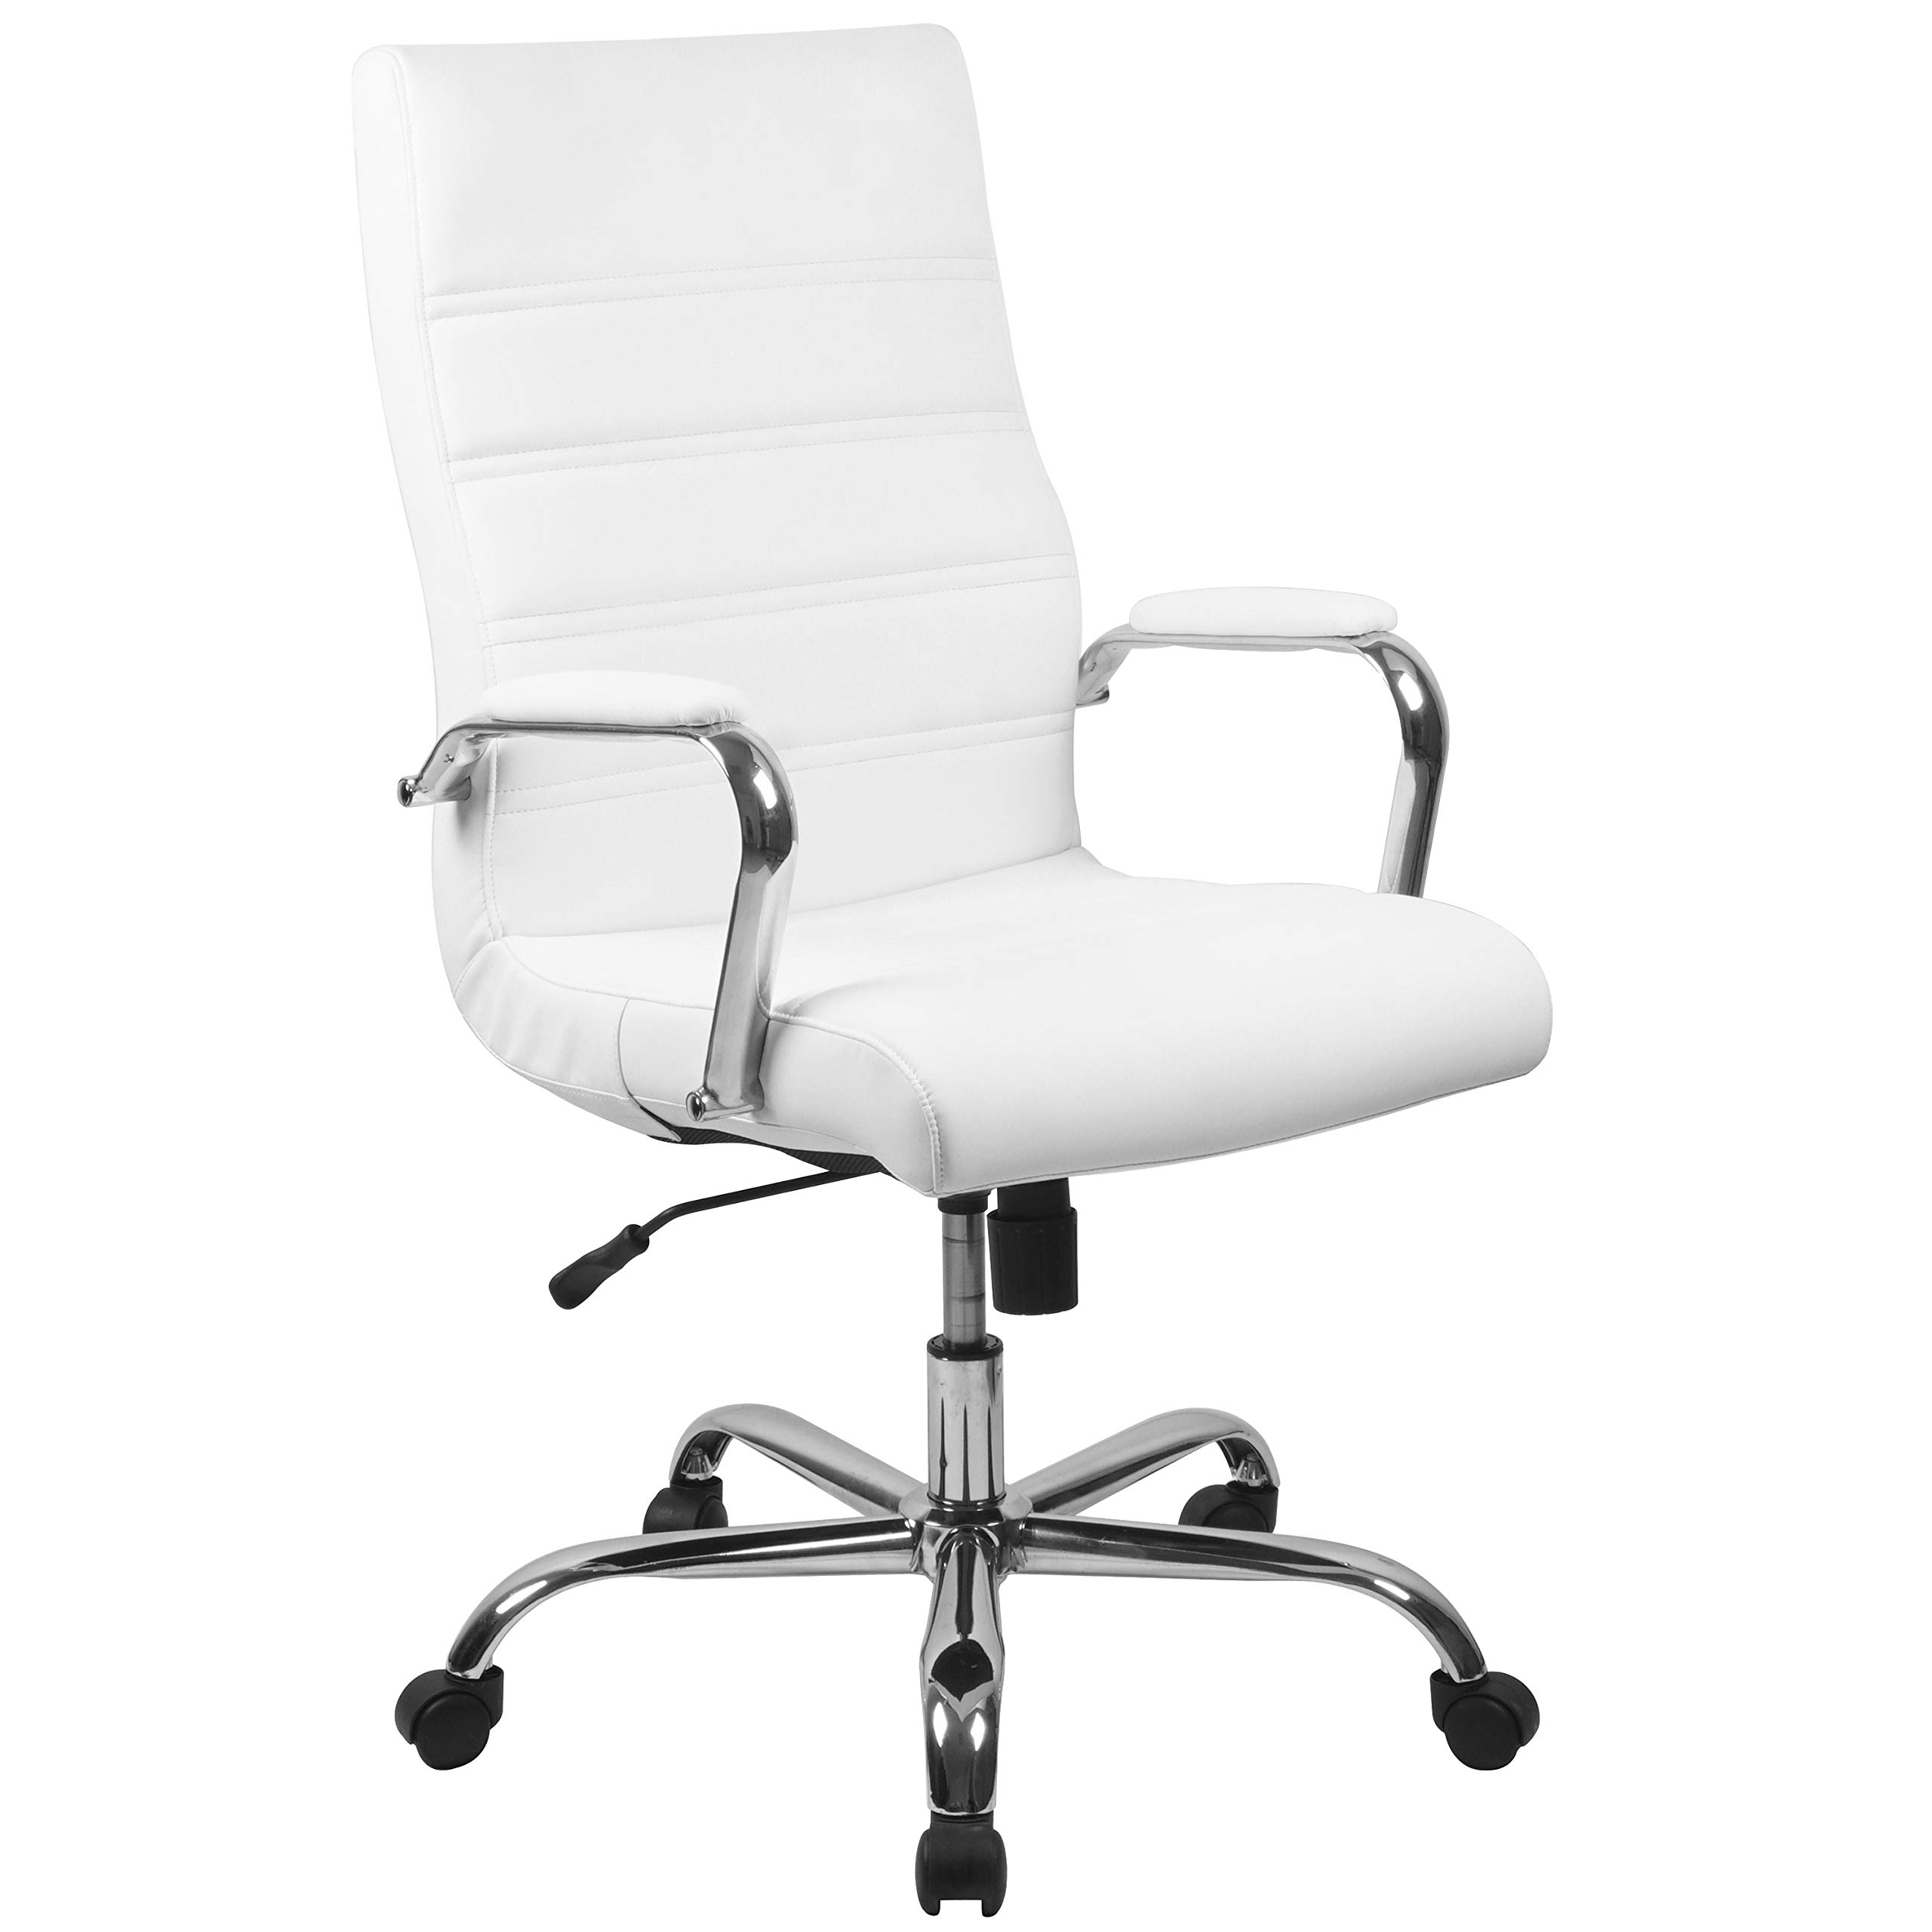 Flash Furniture High Back Desk Chair - White LeatherSoft Executive Swivel Office Chair with Chrome Frame - Swivel Arm Chair